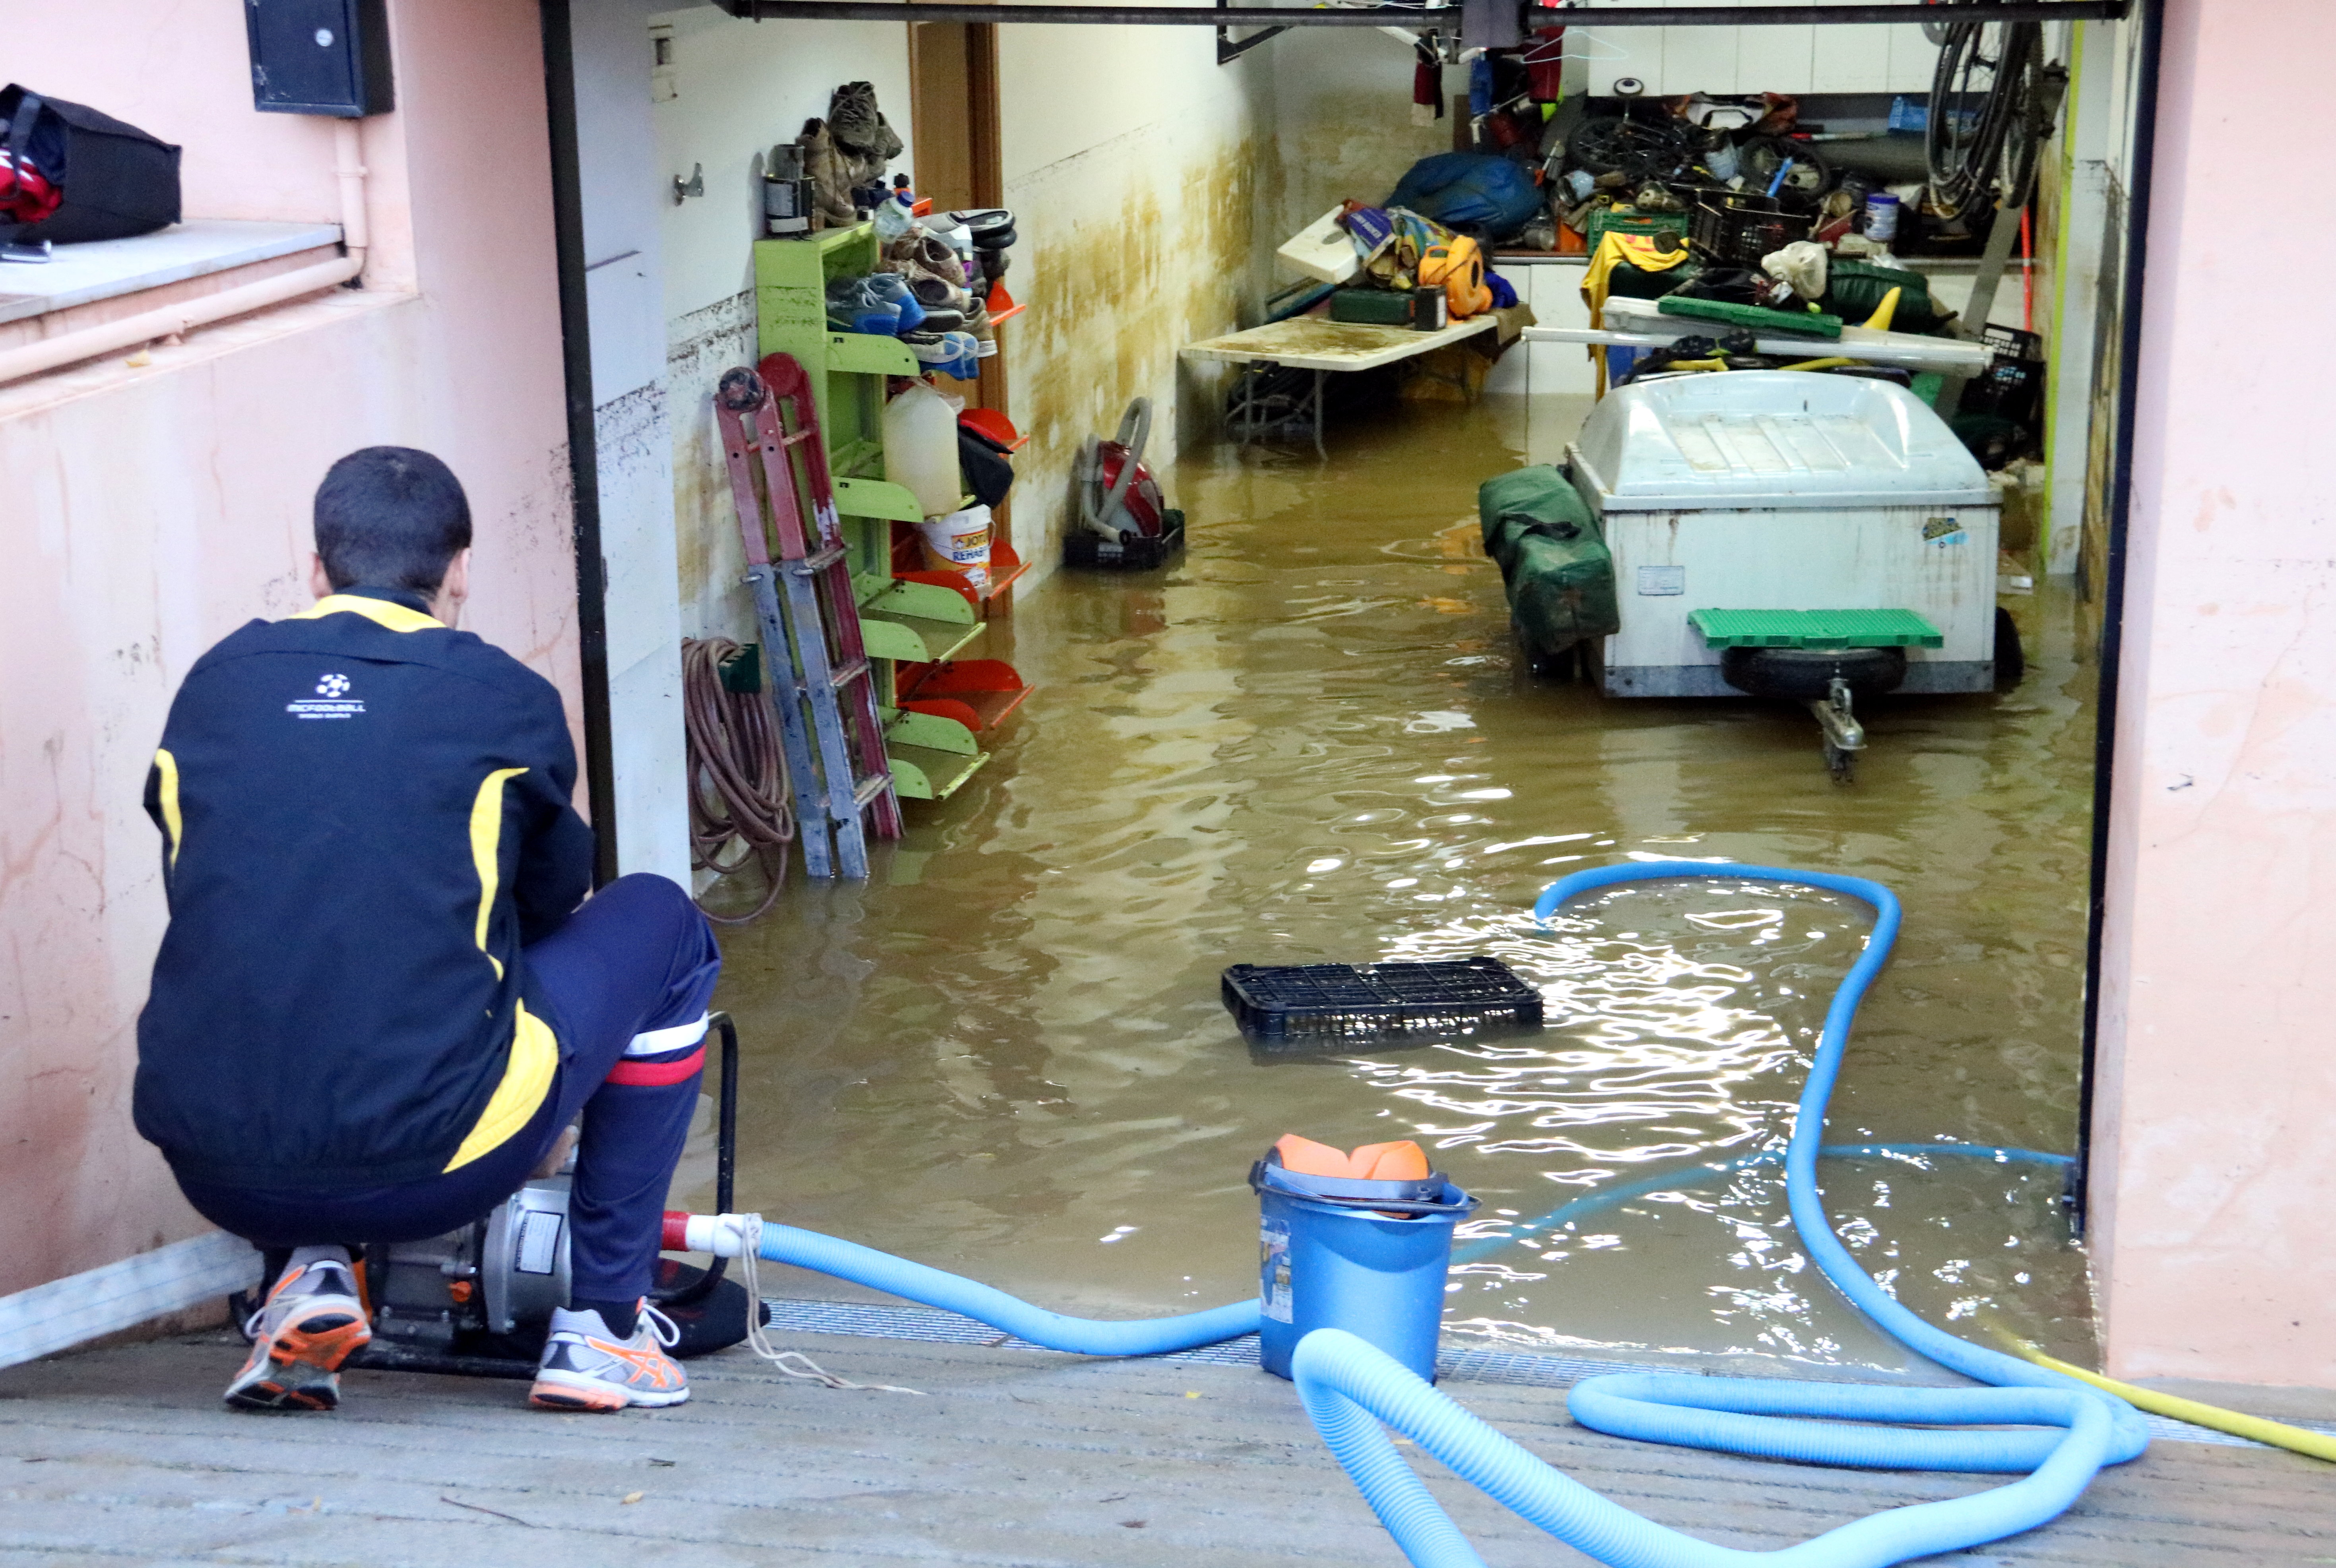 A flooded garage in the north of Catalonia on November 19 2018 (by Gemma Tubert)